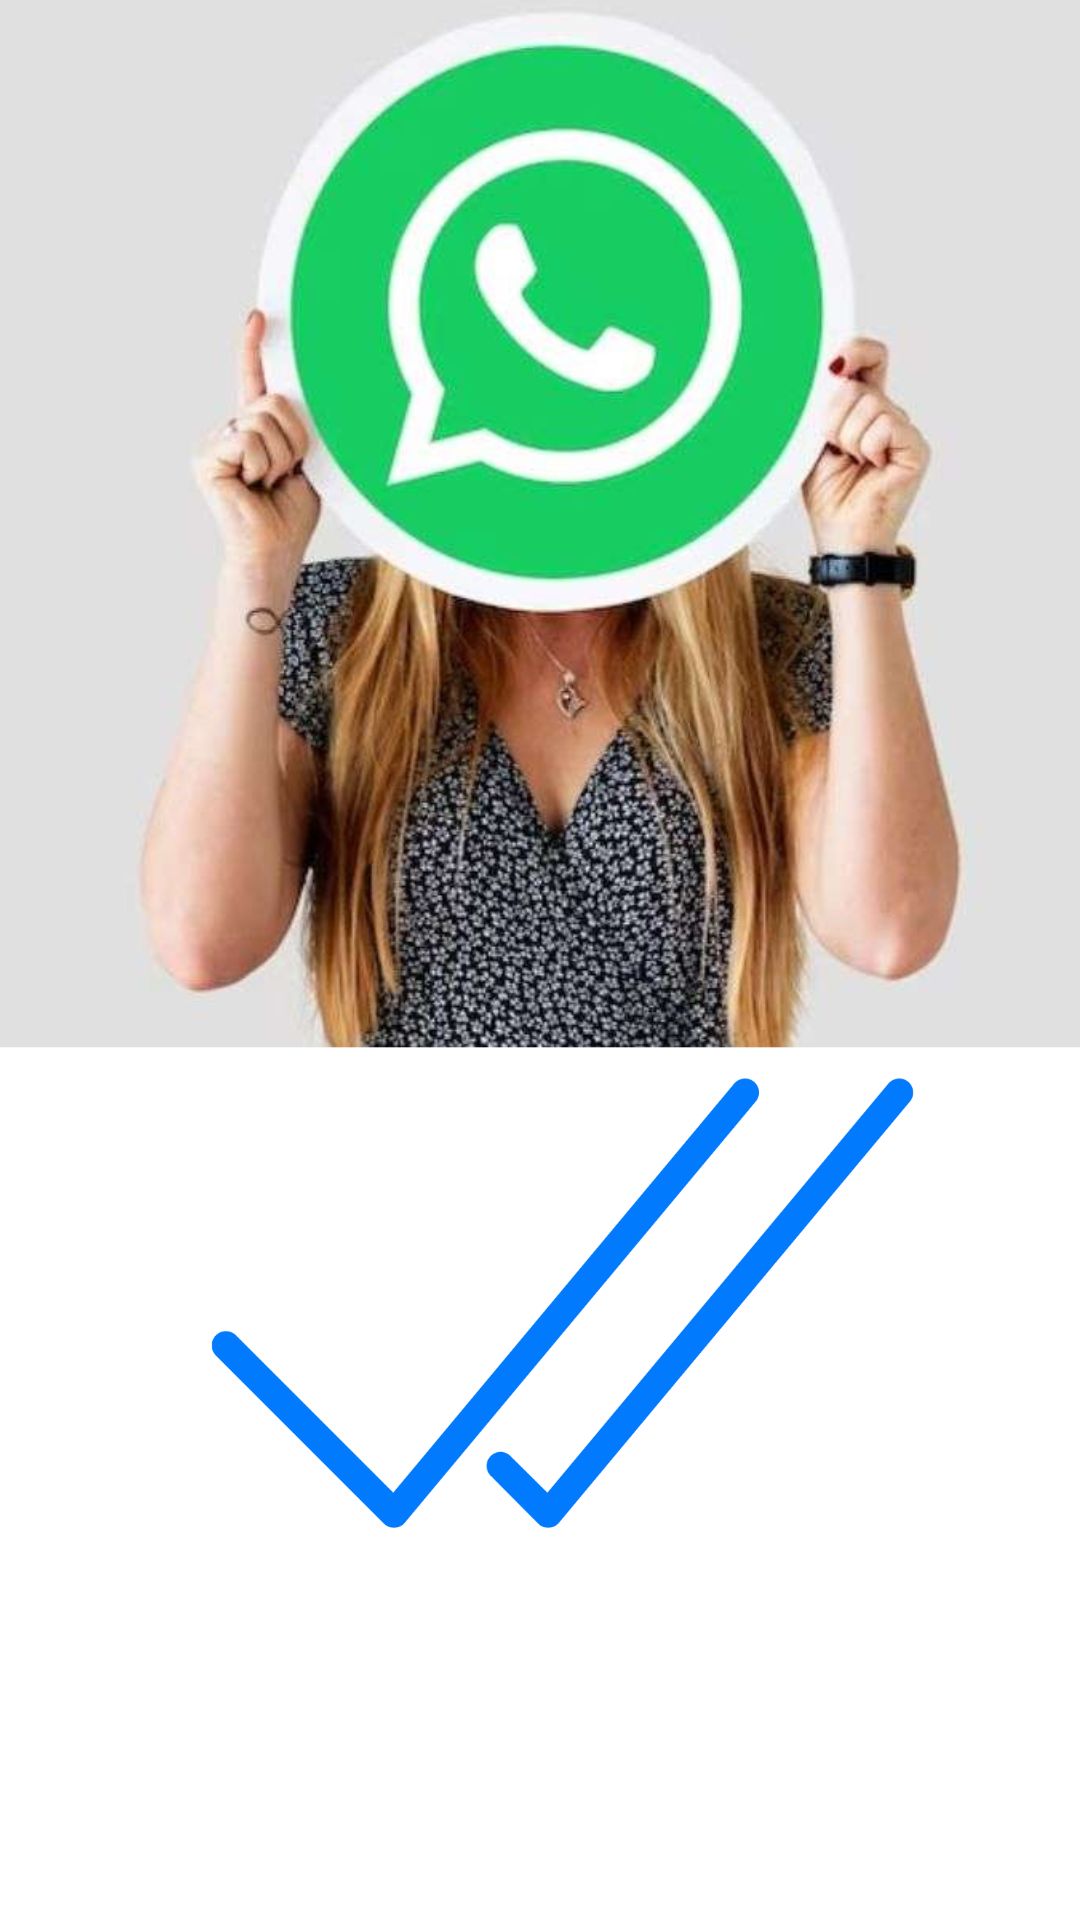 How to turn off  blue tick feature on WhatsApp - A quick guide for iOS users
